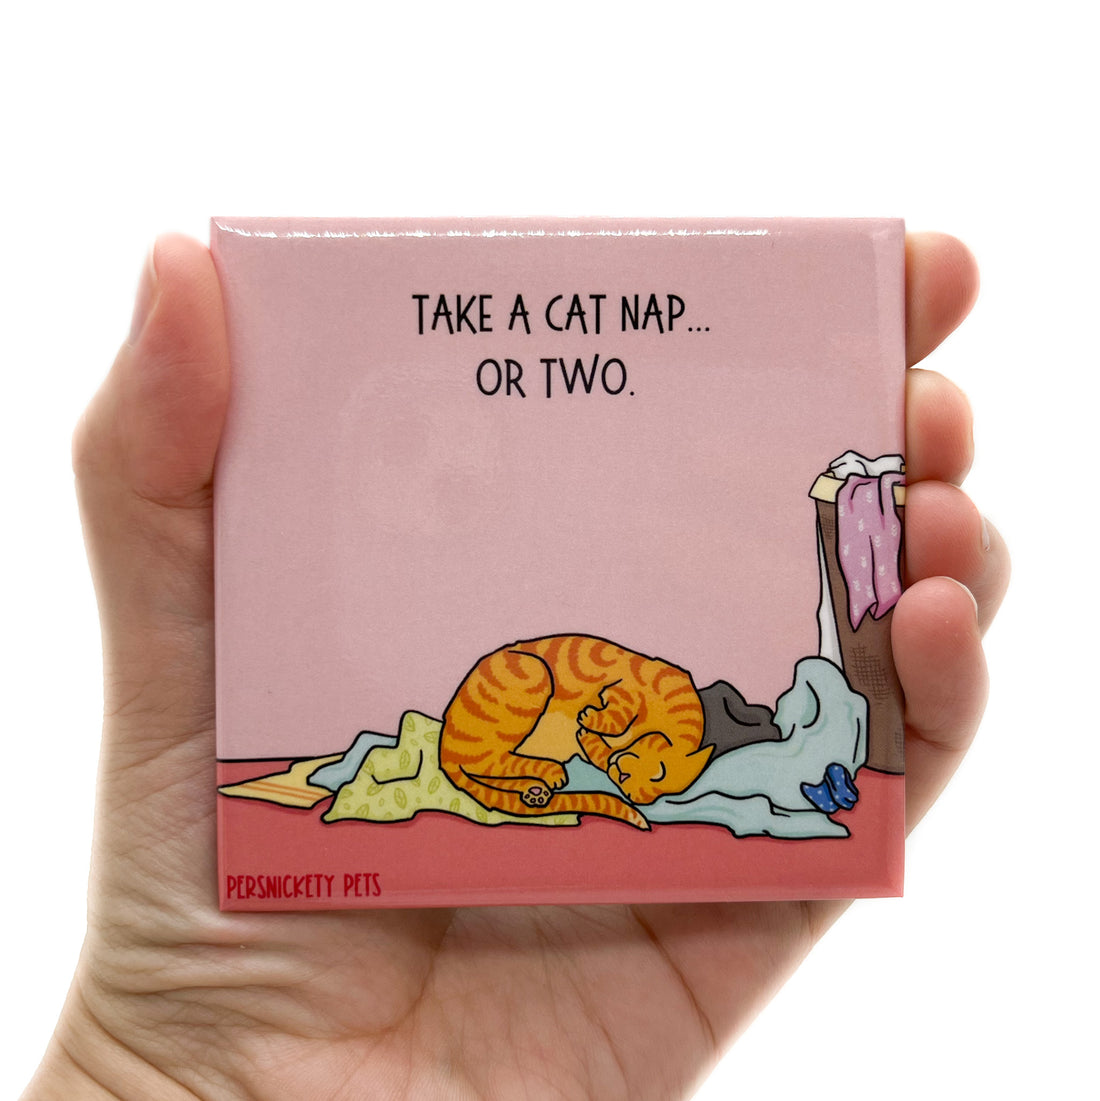 Persnickety Pets: Take a Cat Nap fridge magnet in hand